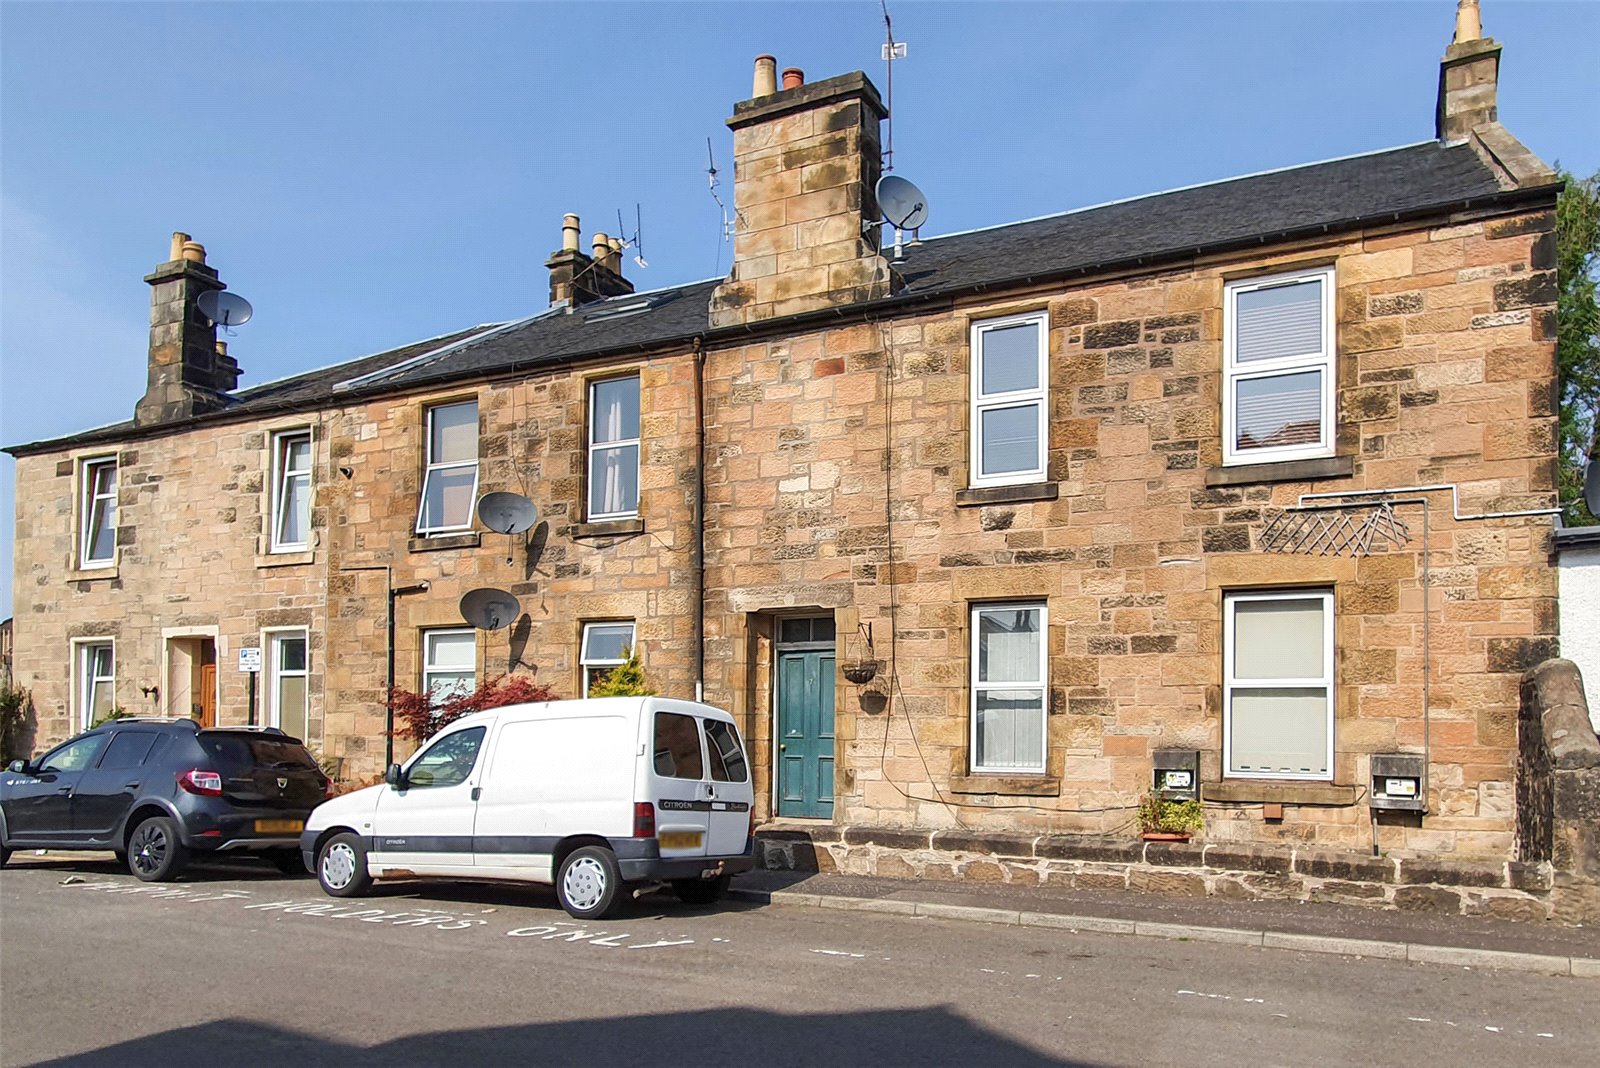 Stirling Property of the Week (13th Aug 2022)